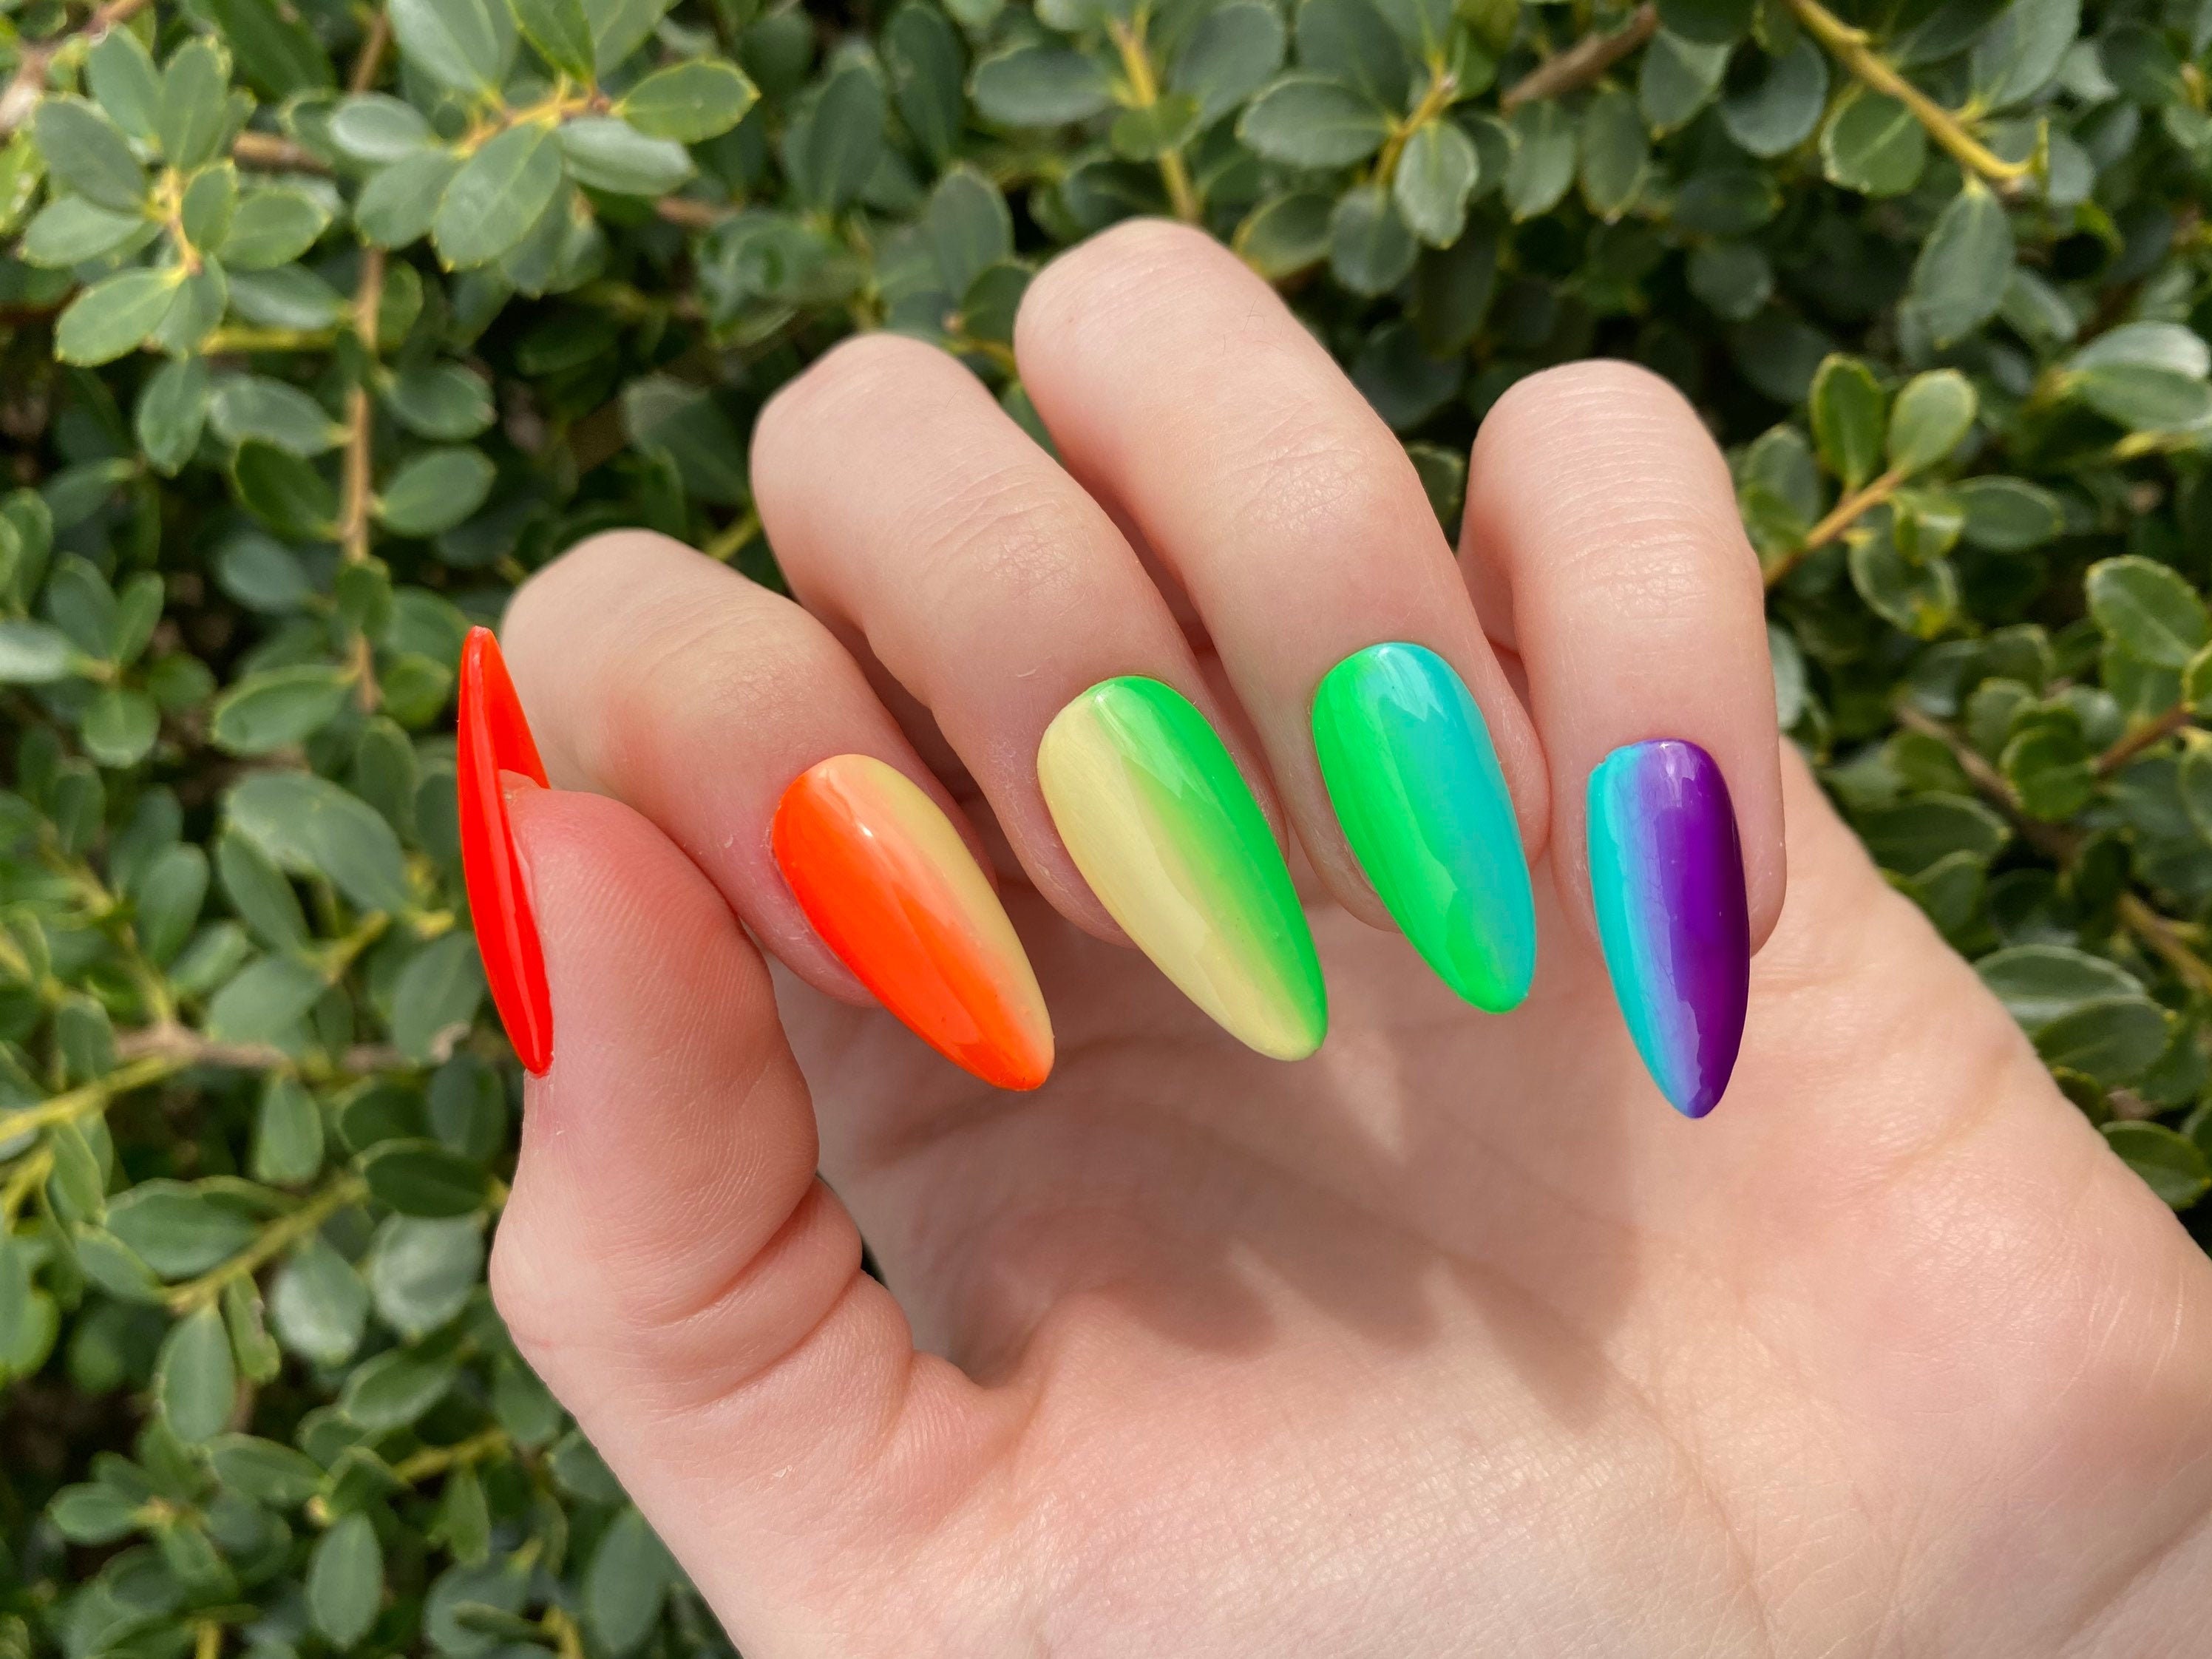 Rainbow Nails / Rainbow Gradient Press on Nails picture photo